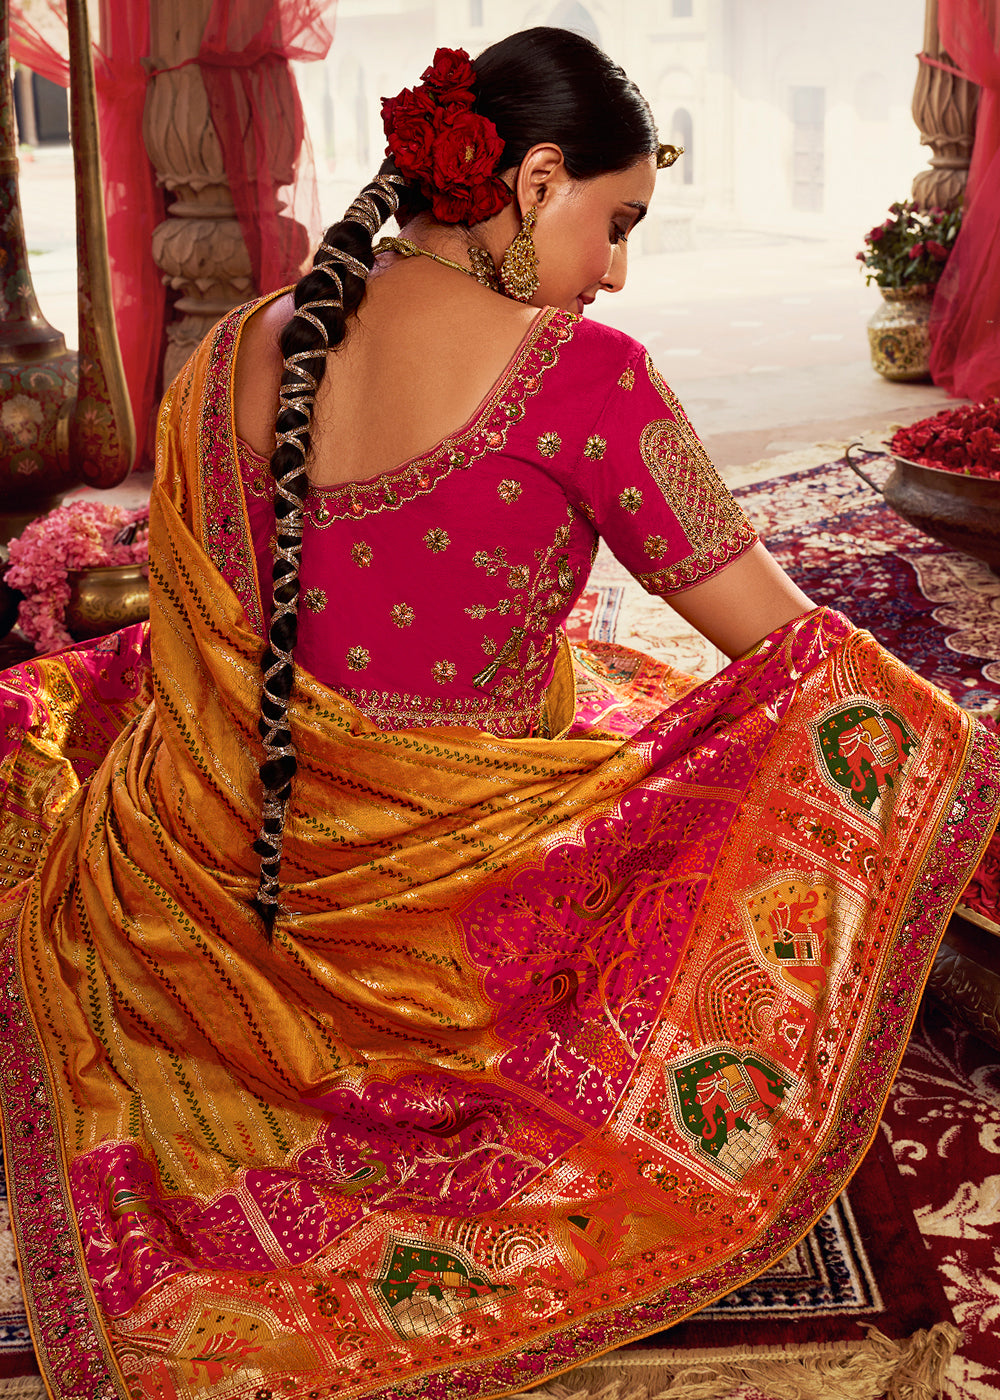 Buy Now Royal Multicolor Pink Embroidered Bridal Lehenga Choli Online in USA, UK, Canada & Worldwide at Empress Clothing.